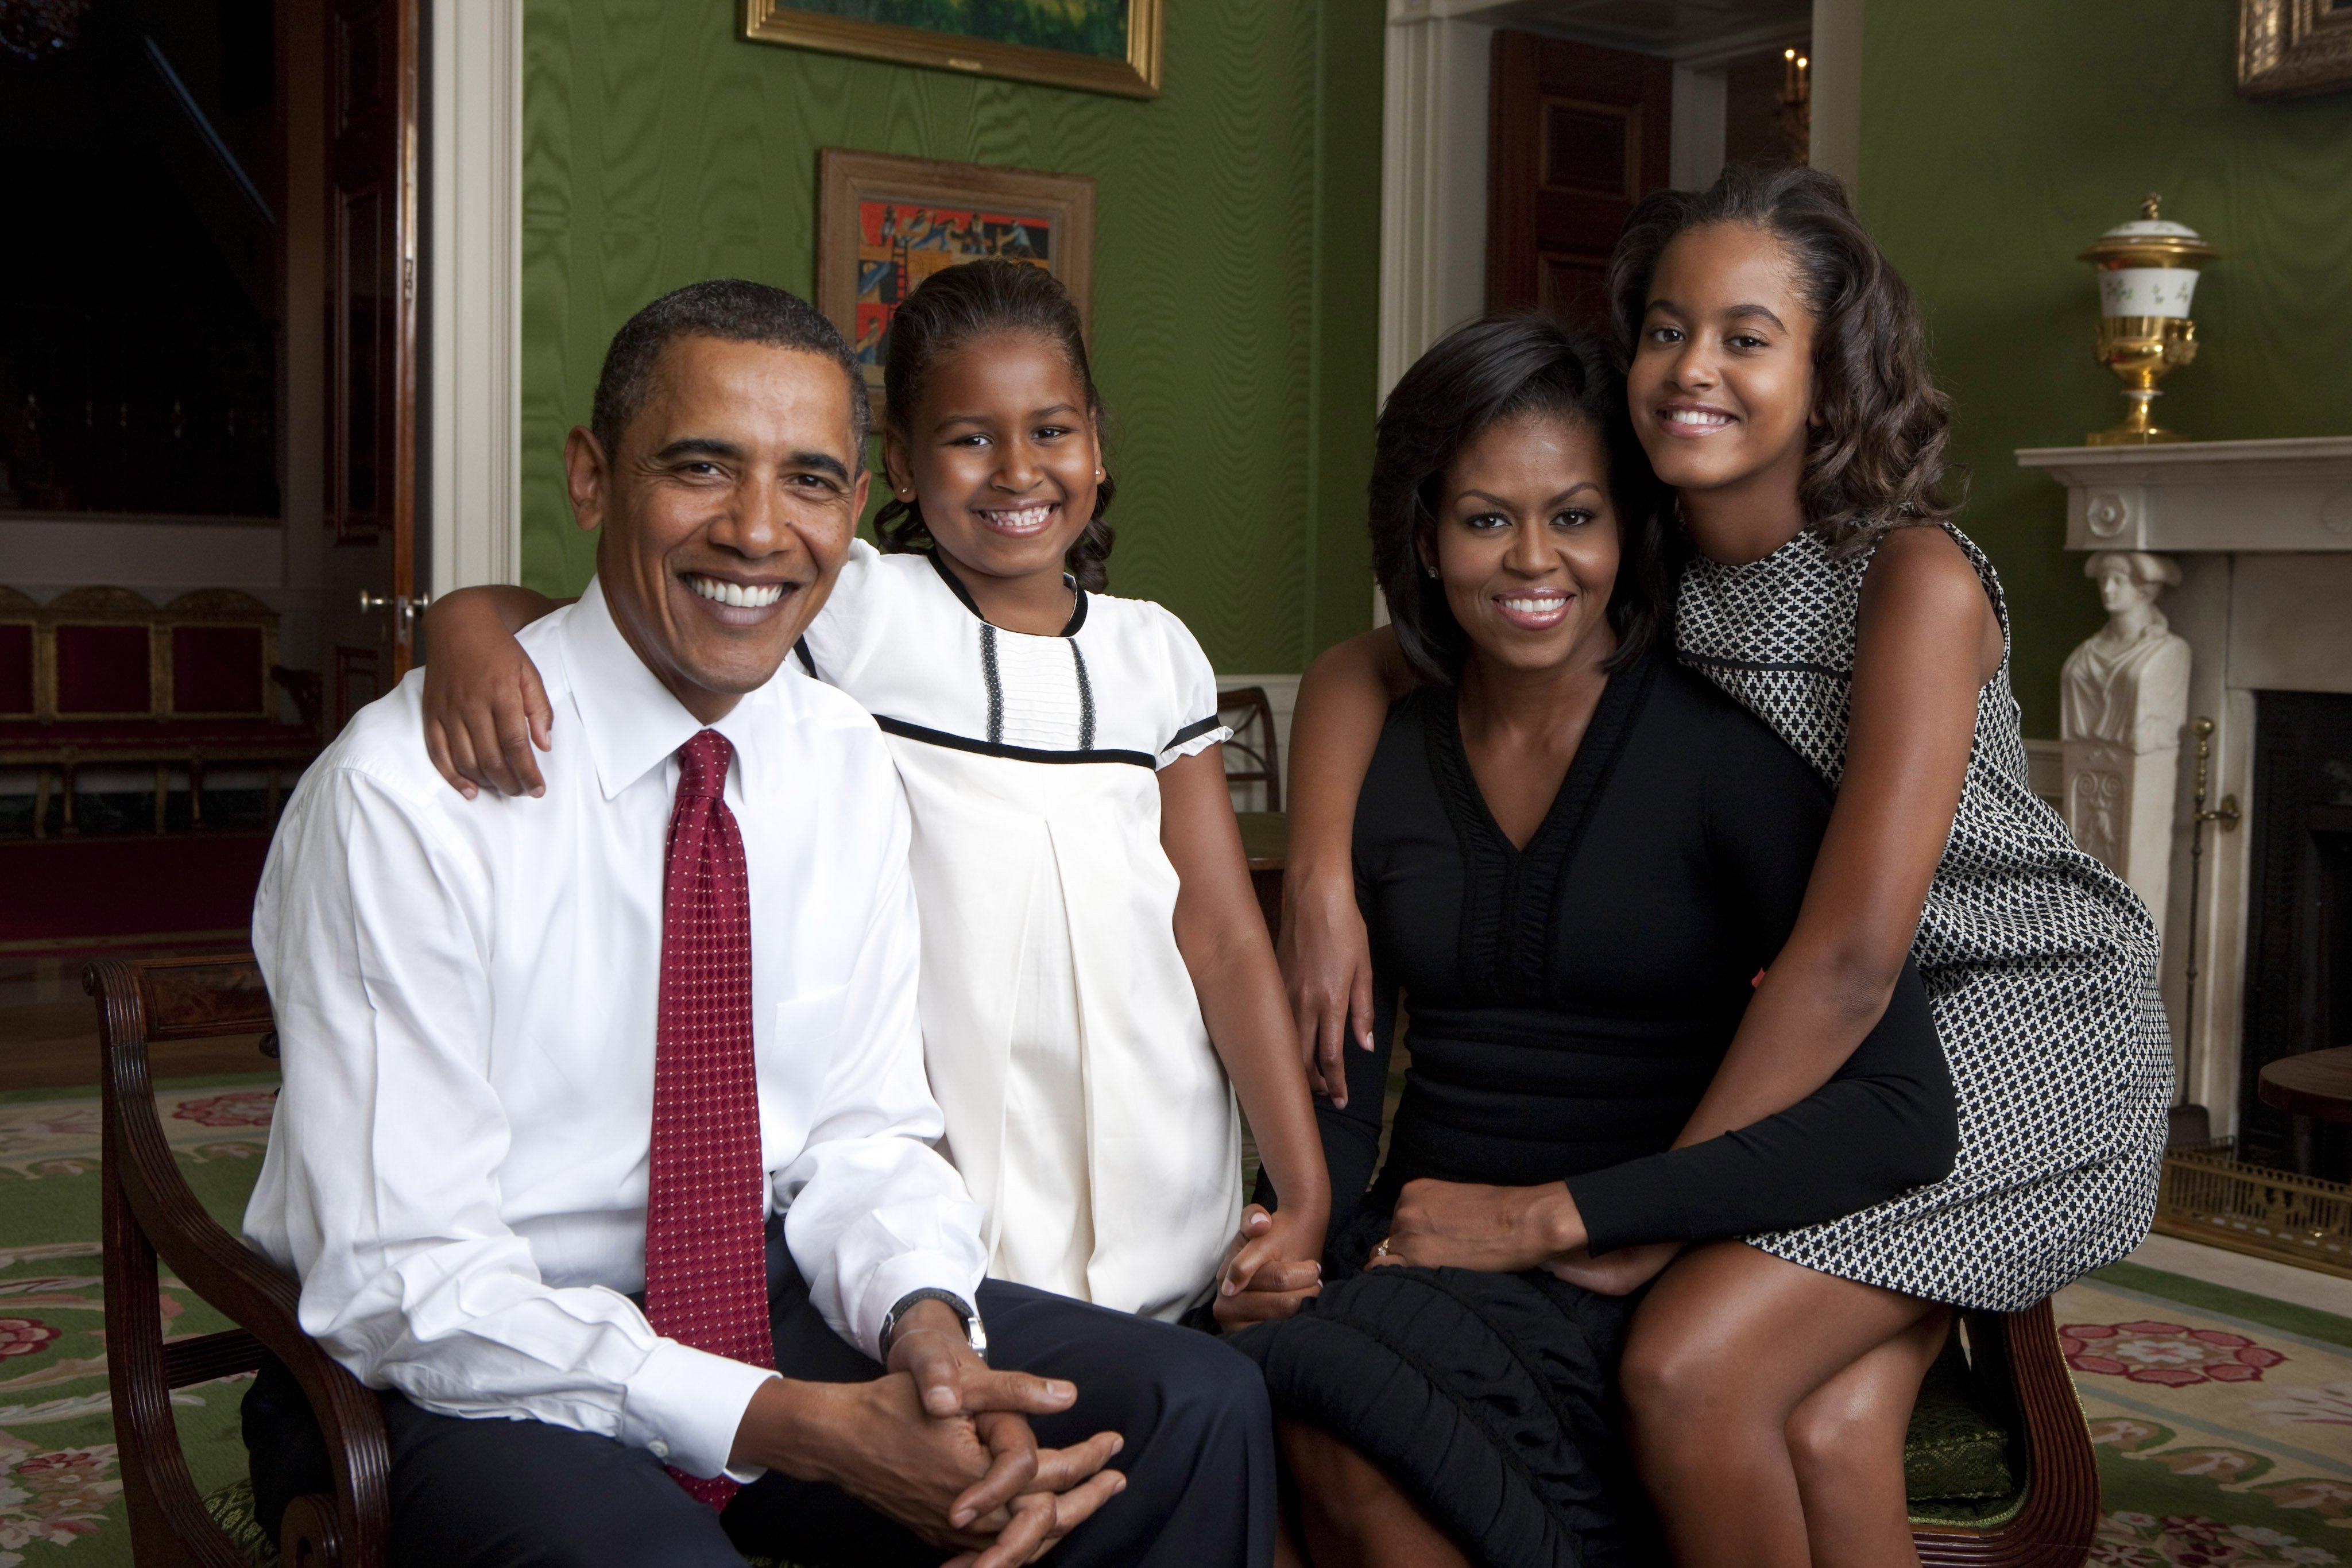 Barack Obama, Michelle Obama, and their daughters, Malia and Sasha pose for a family portrait in the White House on September 1, 2009 | Source: Getty Images